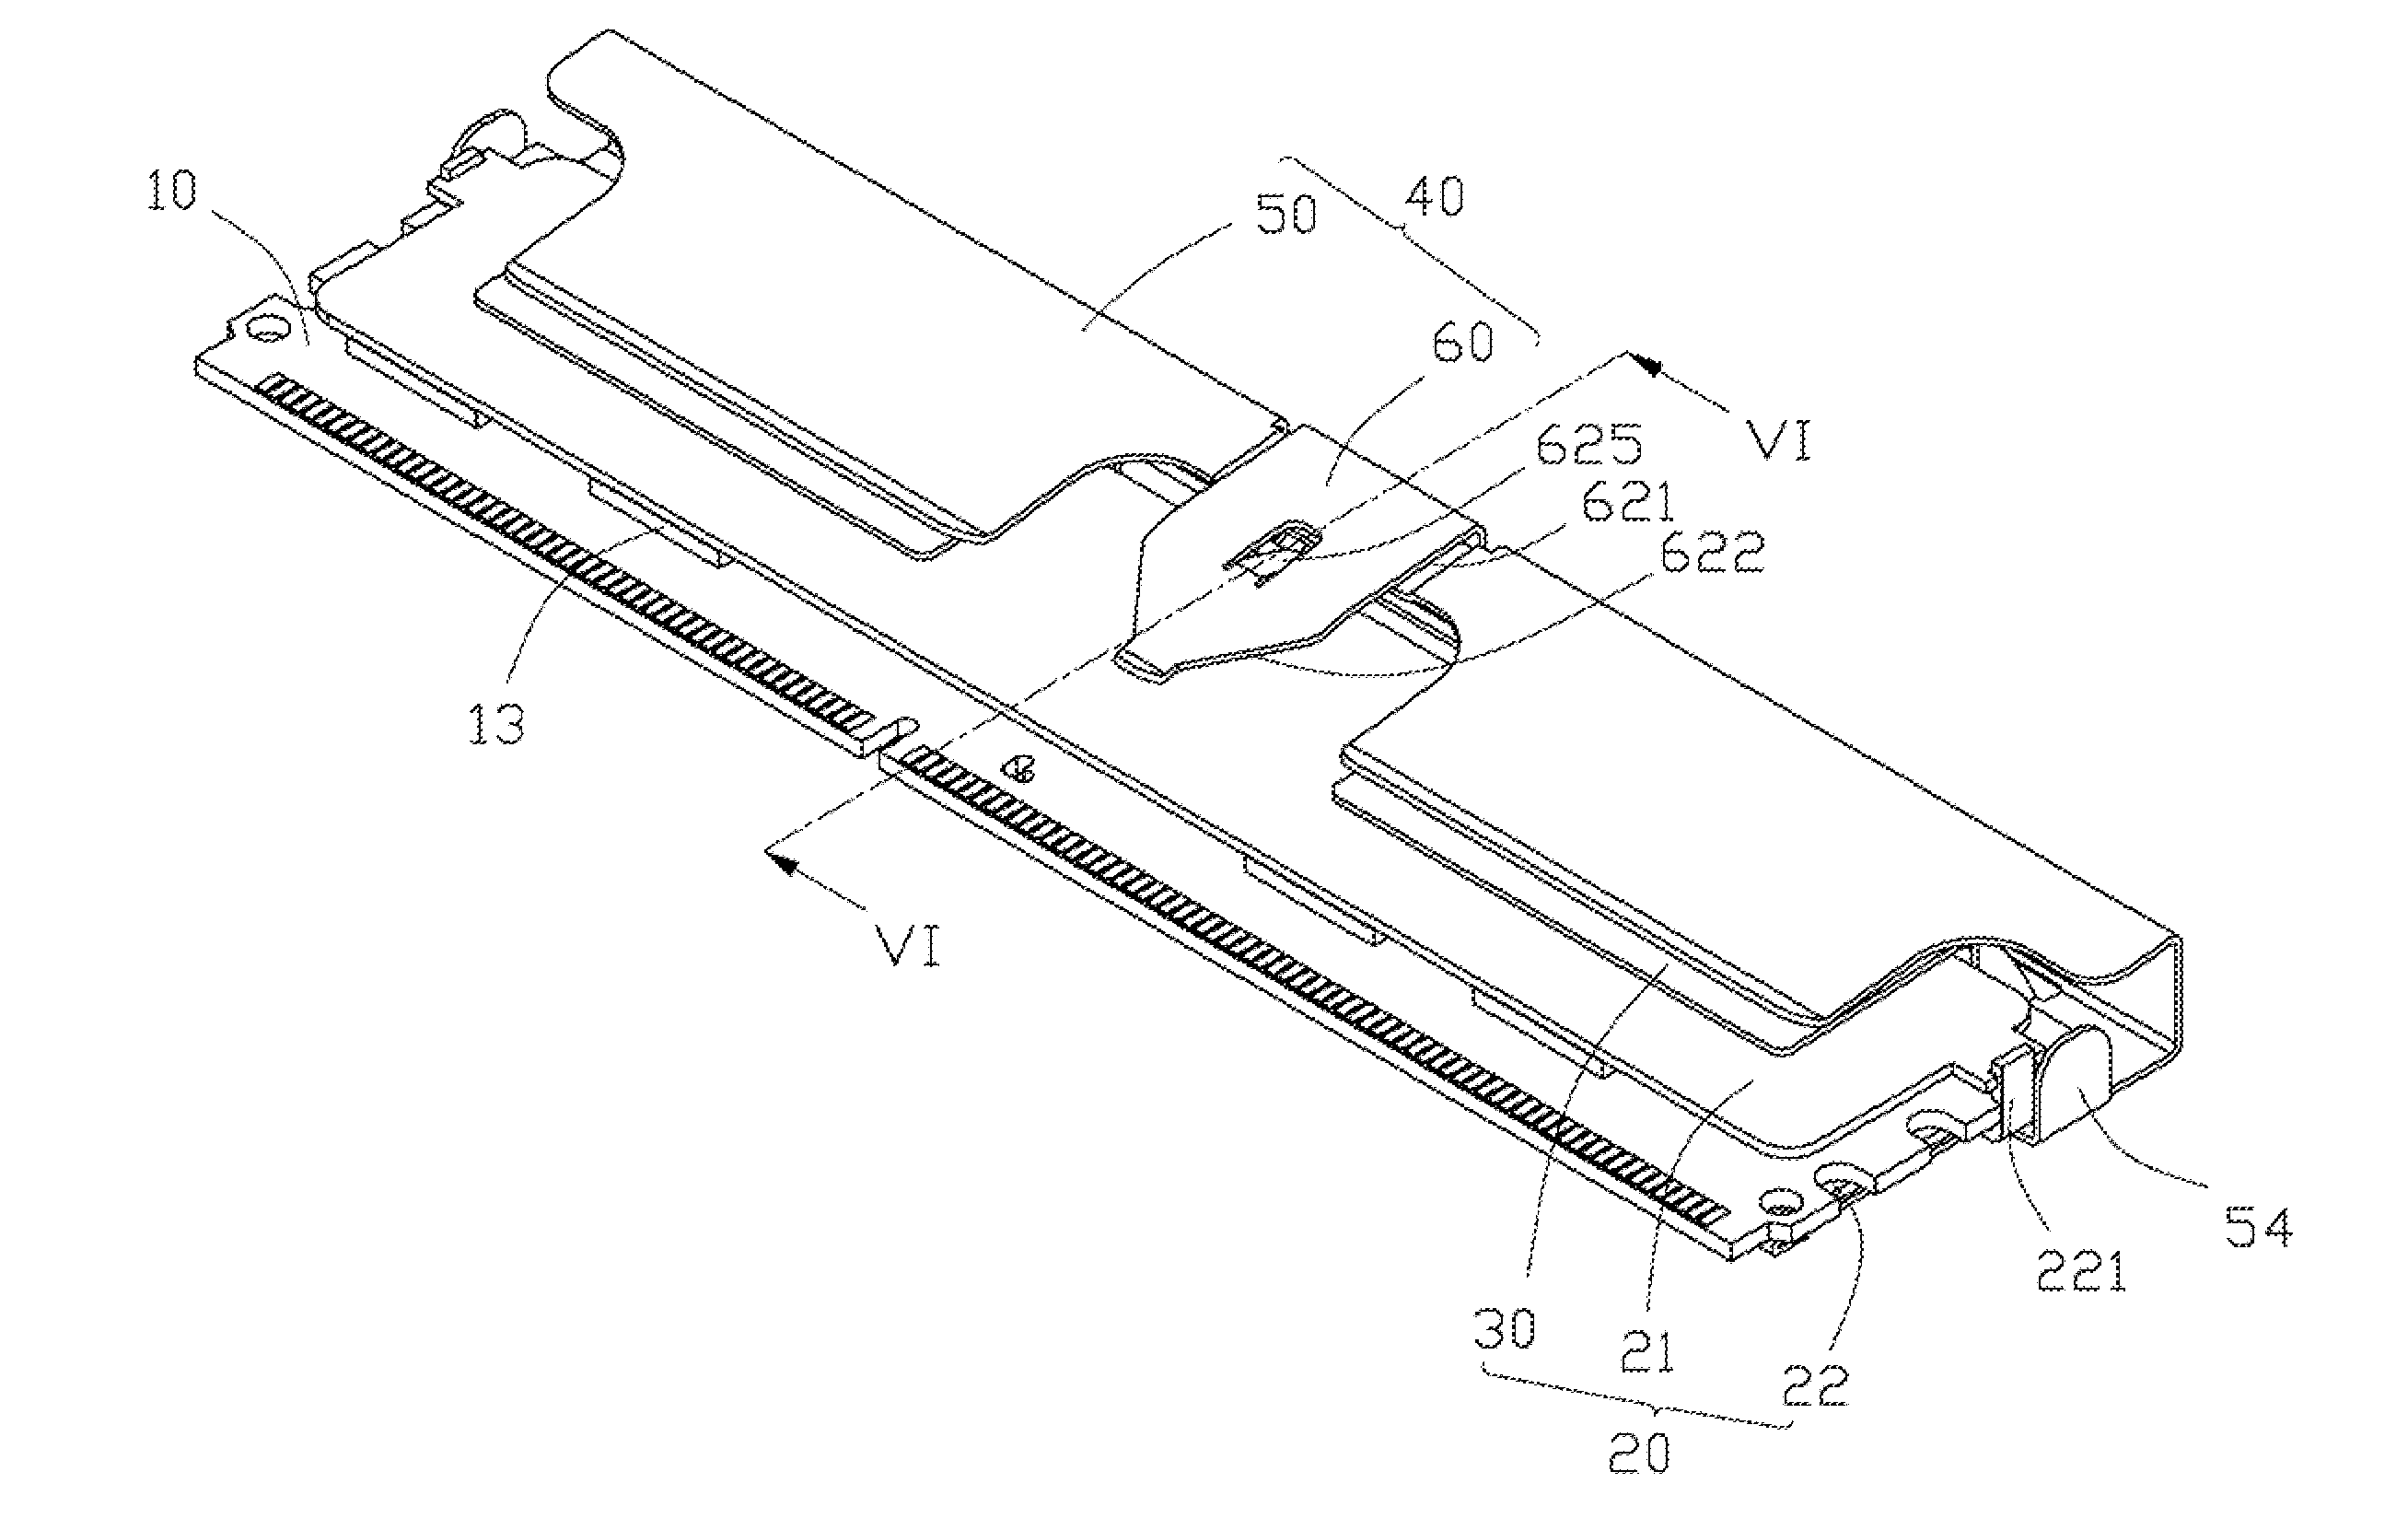 Cooling device for add-on card